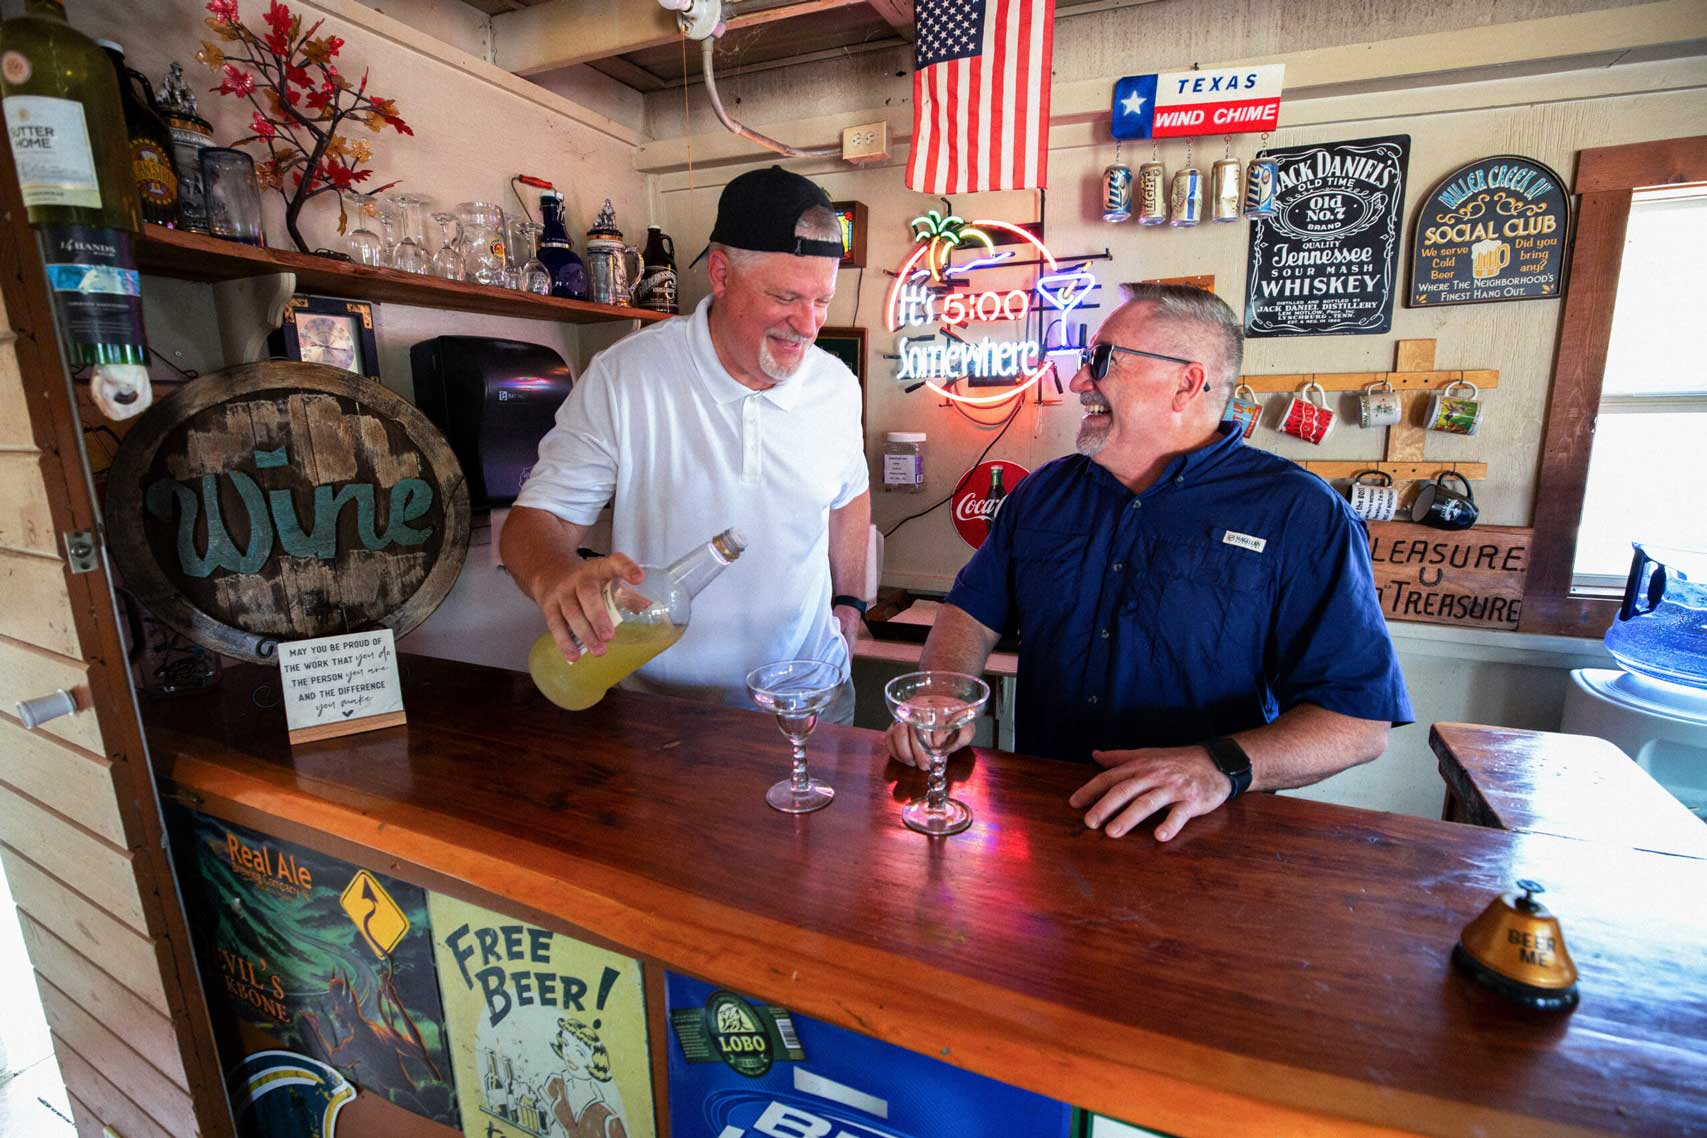 Two friends sharing a laugh and drinks at a bar setup in Johnson City campgrounds, surrounded by vintage decor and memorabilia